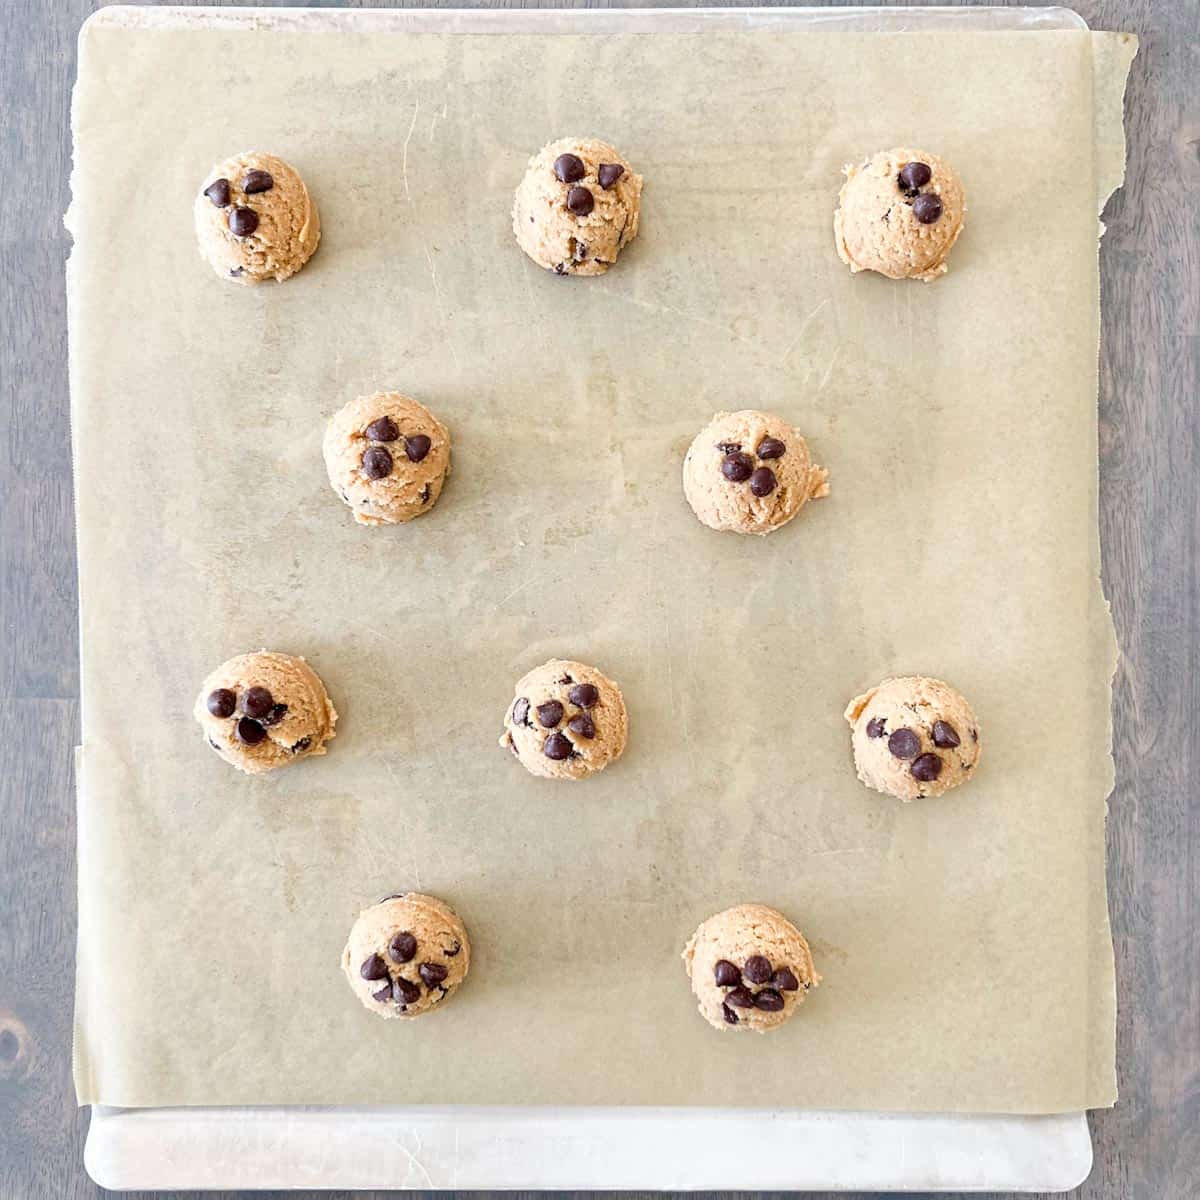 Whole wheat chocolate chip cookie dough on a baking sheet lined with parchment paper.